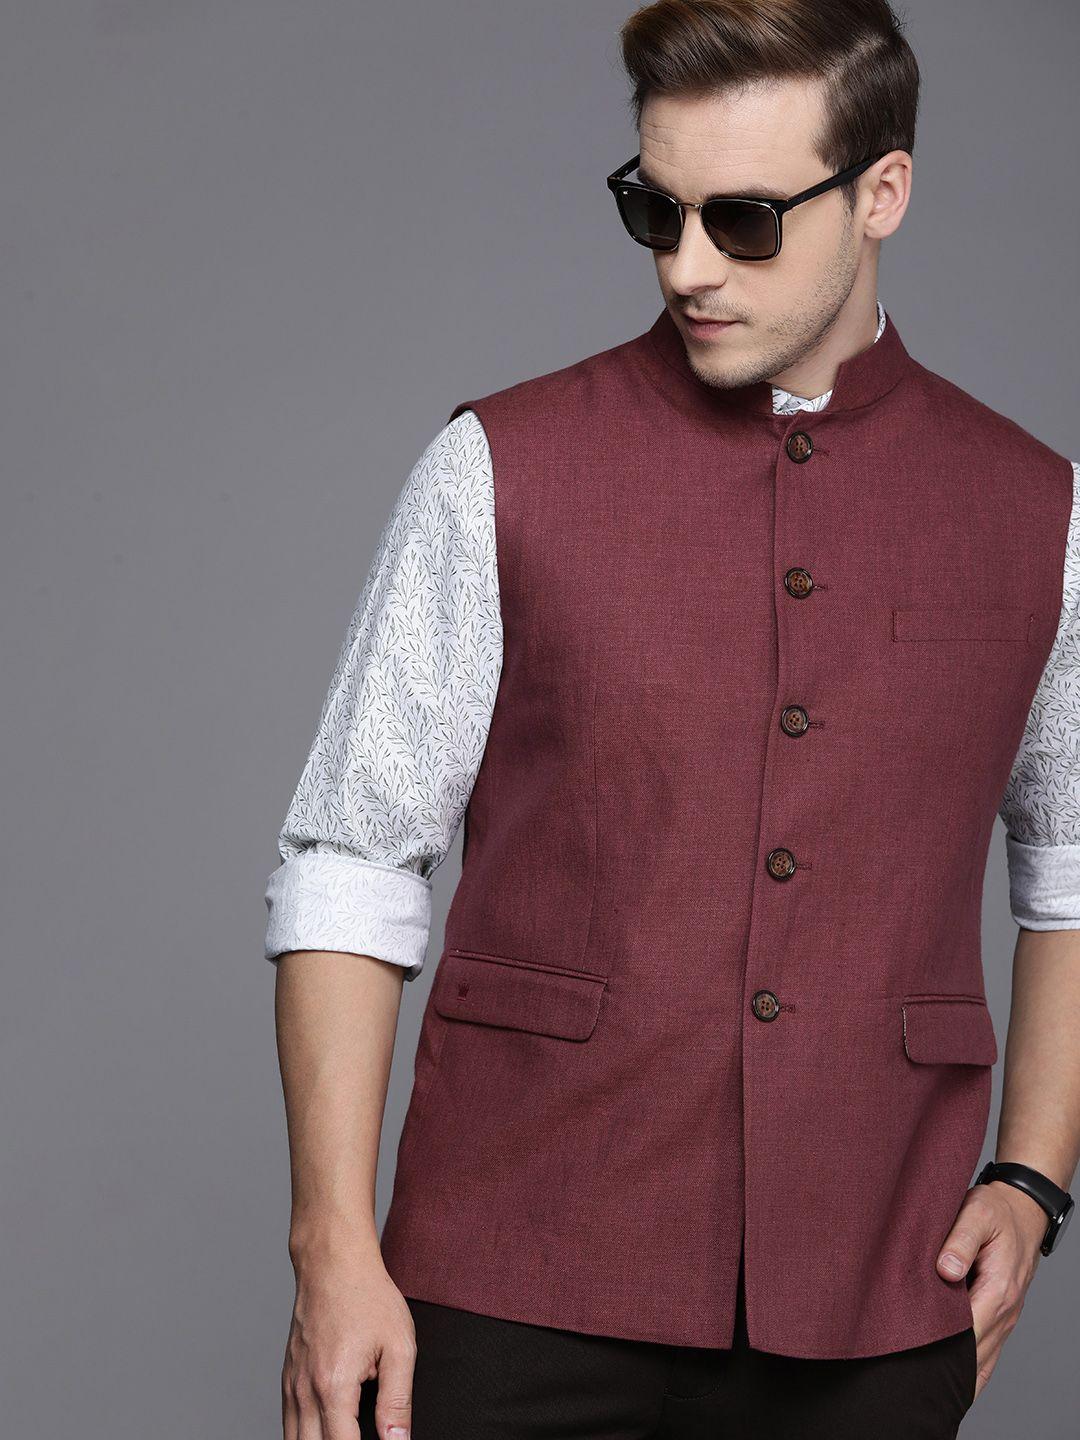 louis-philippe-solid-pure-linen-nehru-jackets